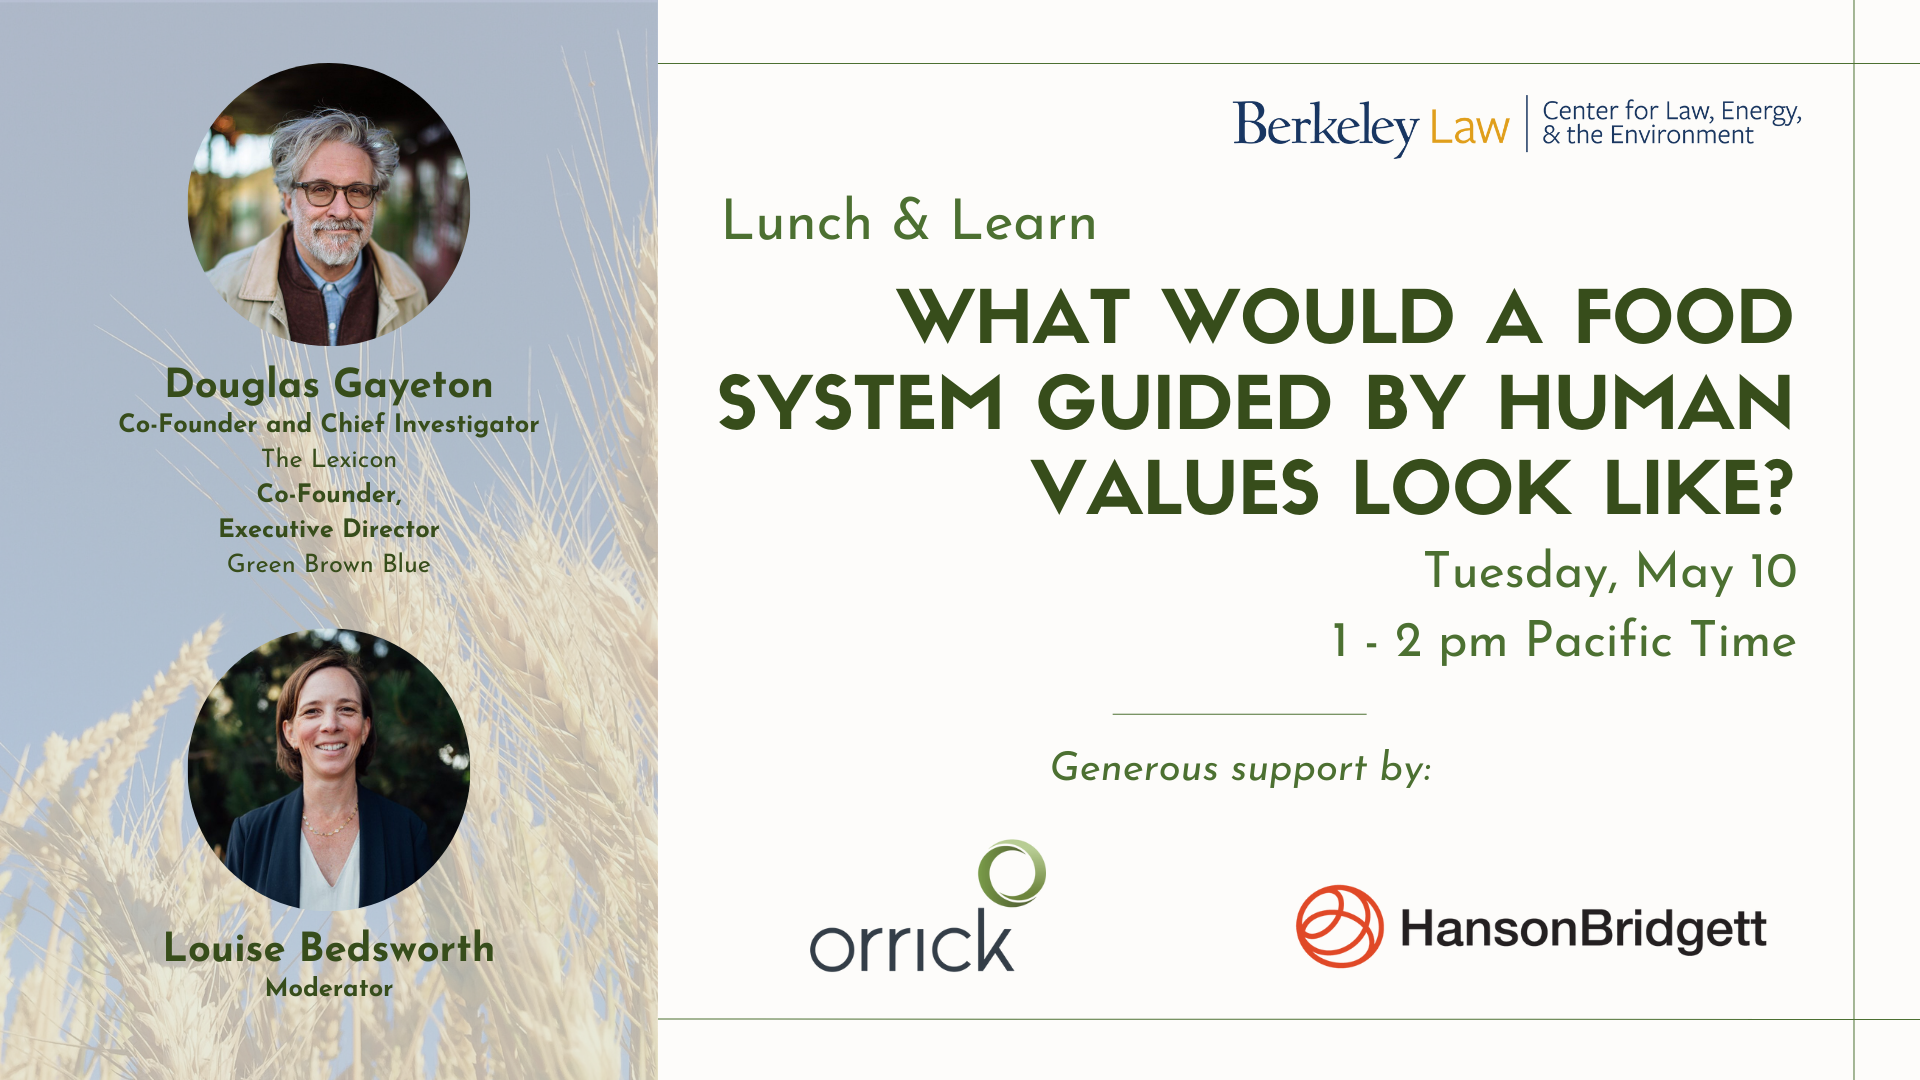 Lunch & Learn What would a food system guided by human values look like flyer